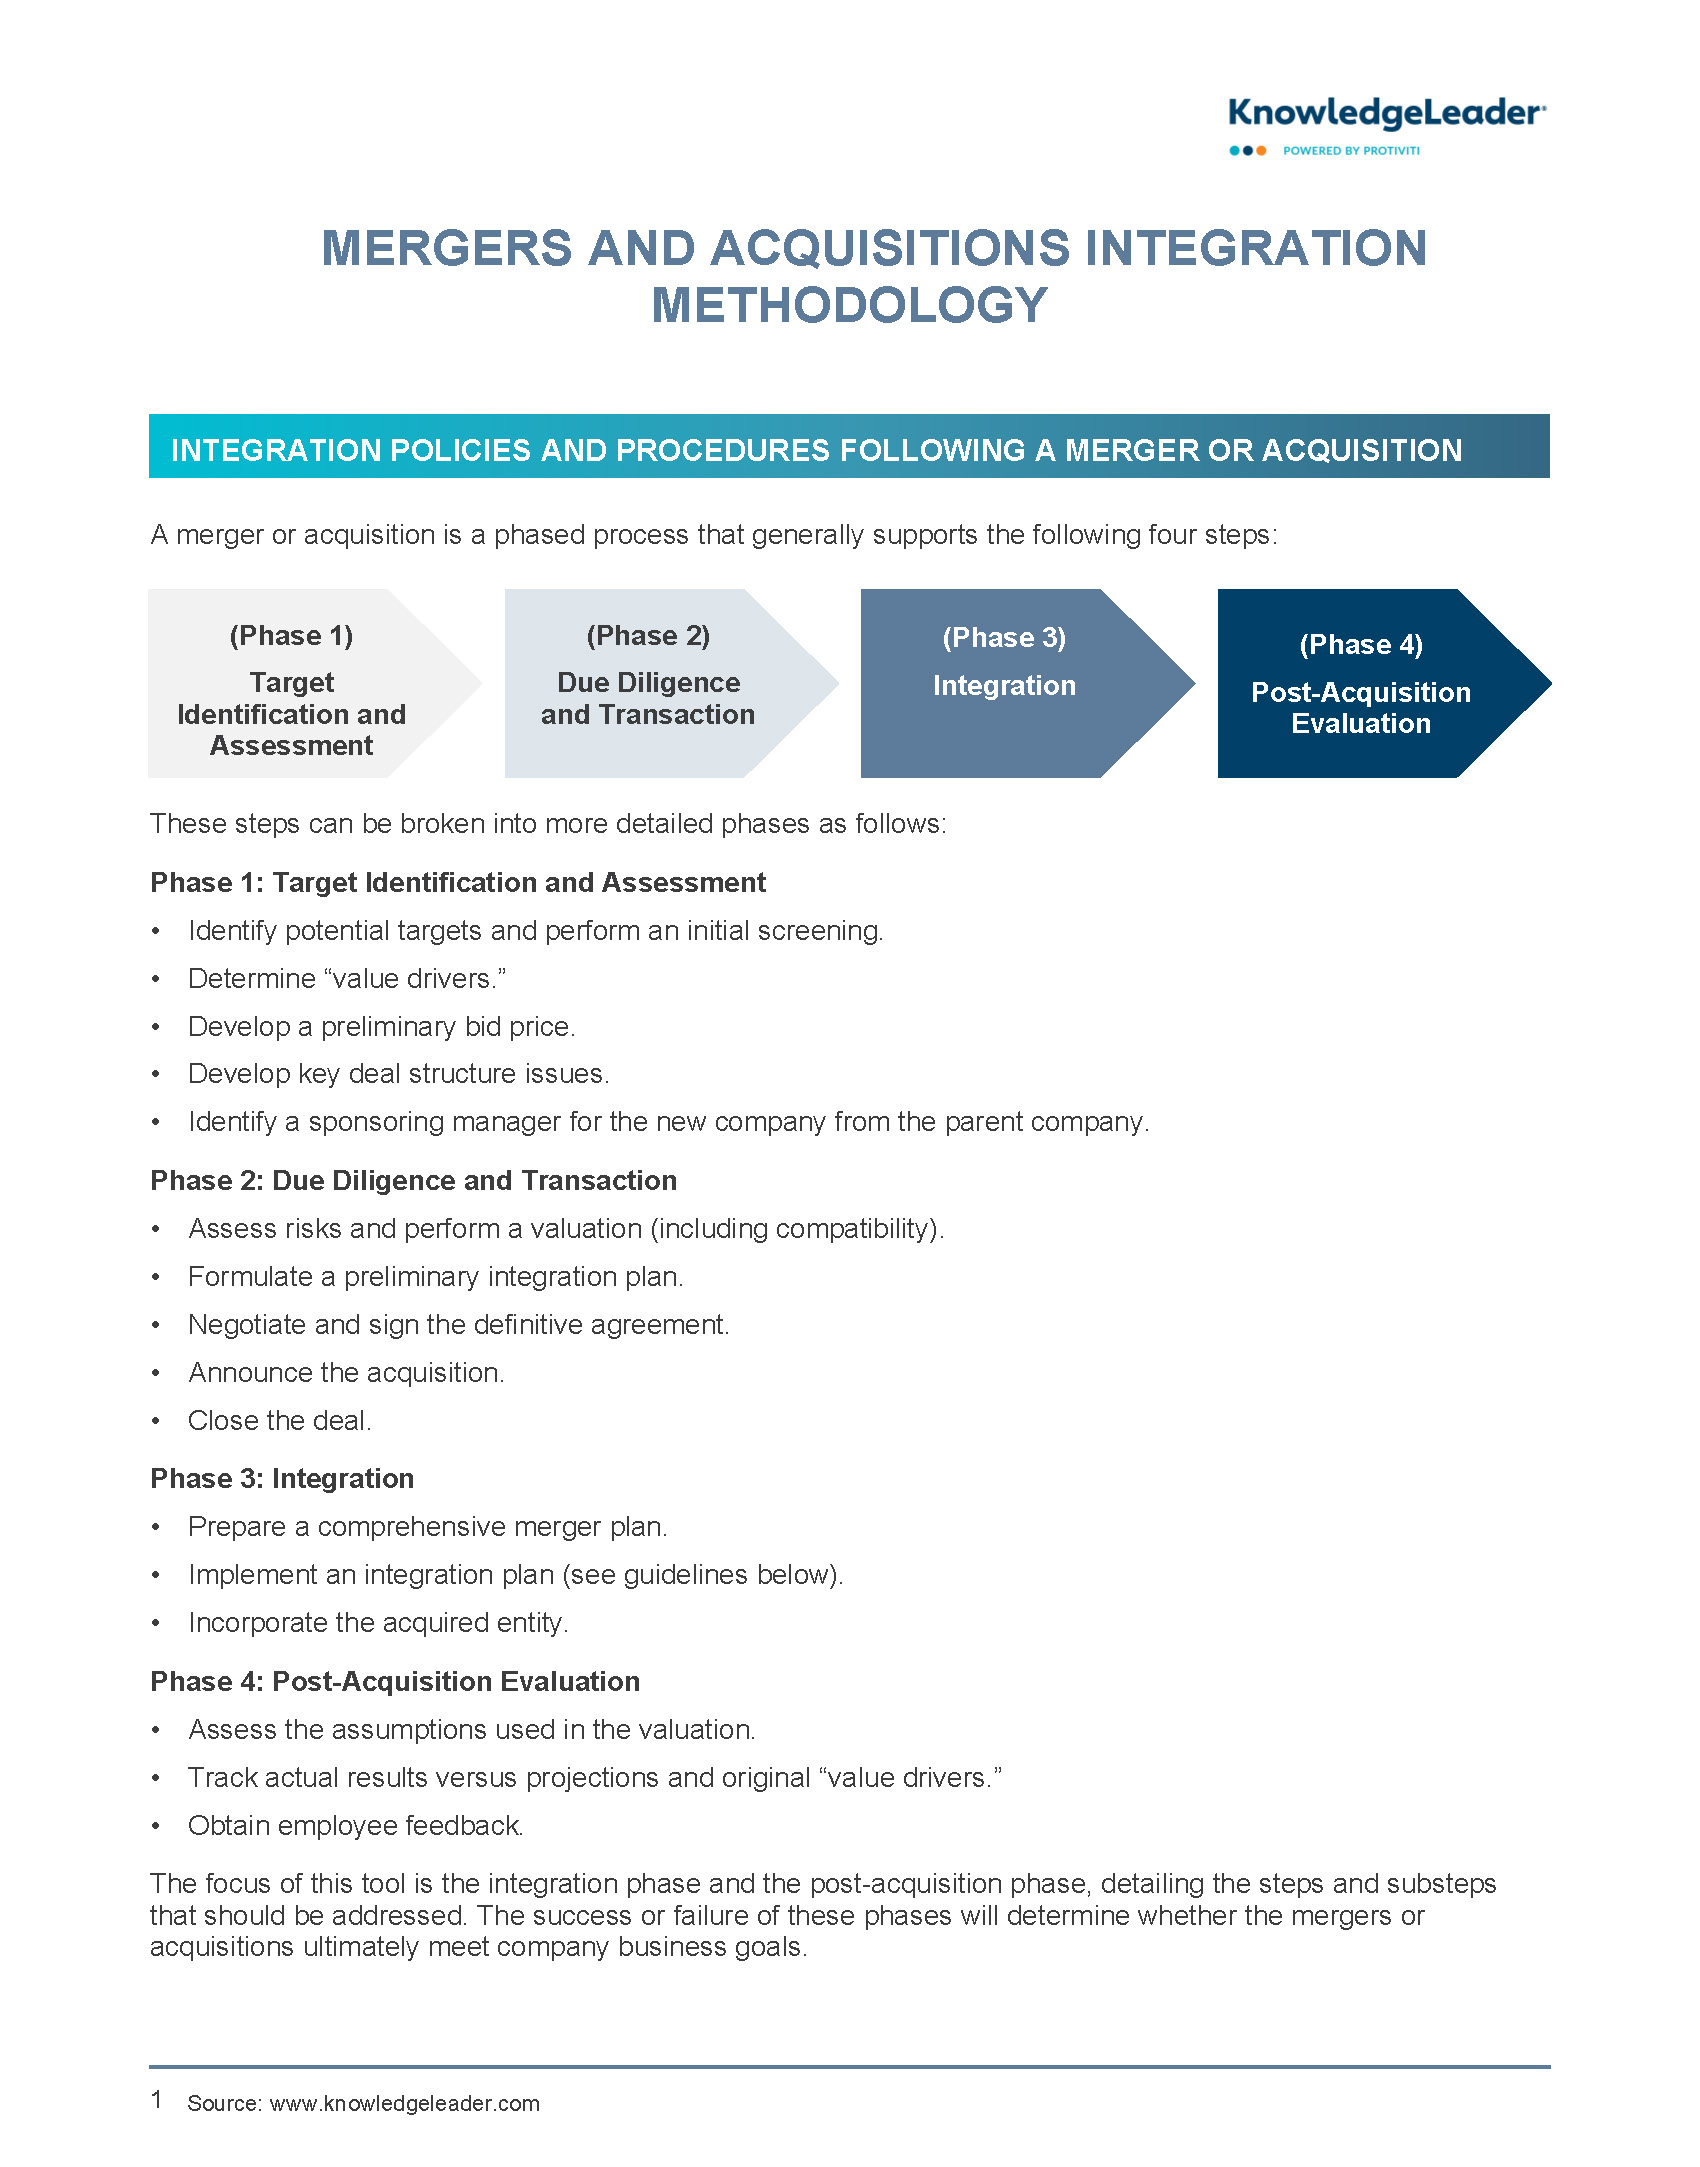 Screenshot of the first page of Mergers and Acquisitions Integration Methodology